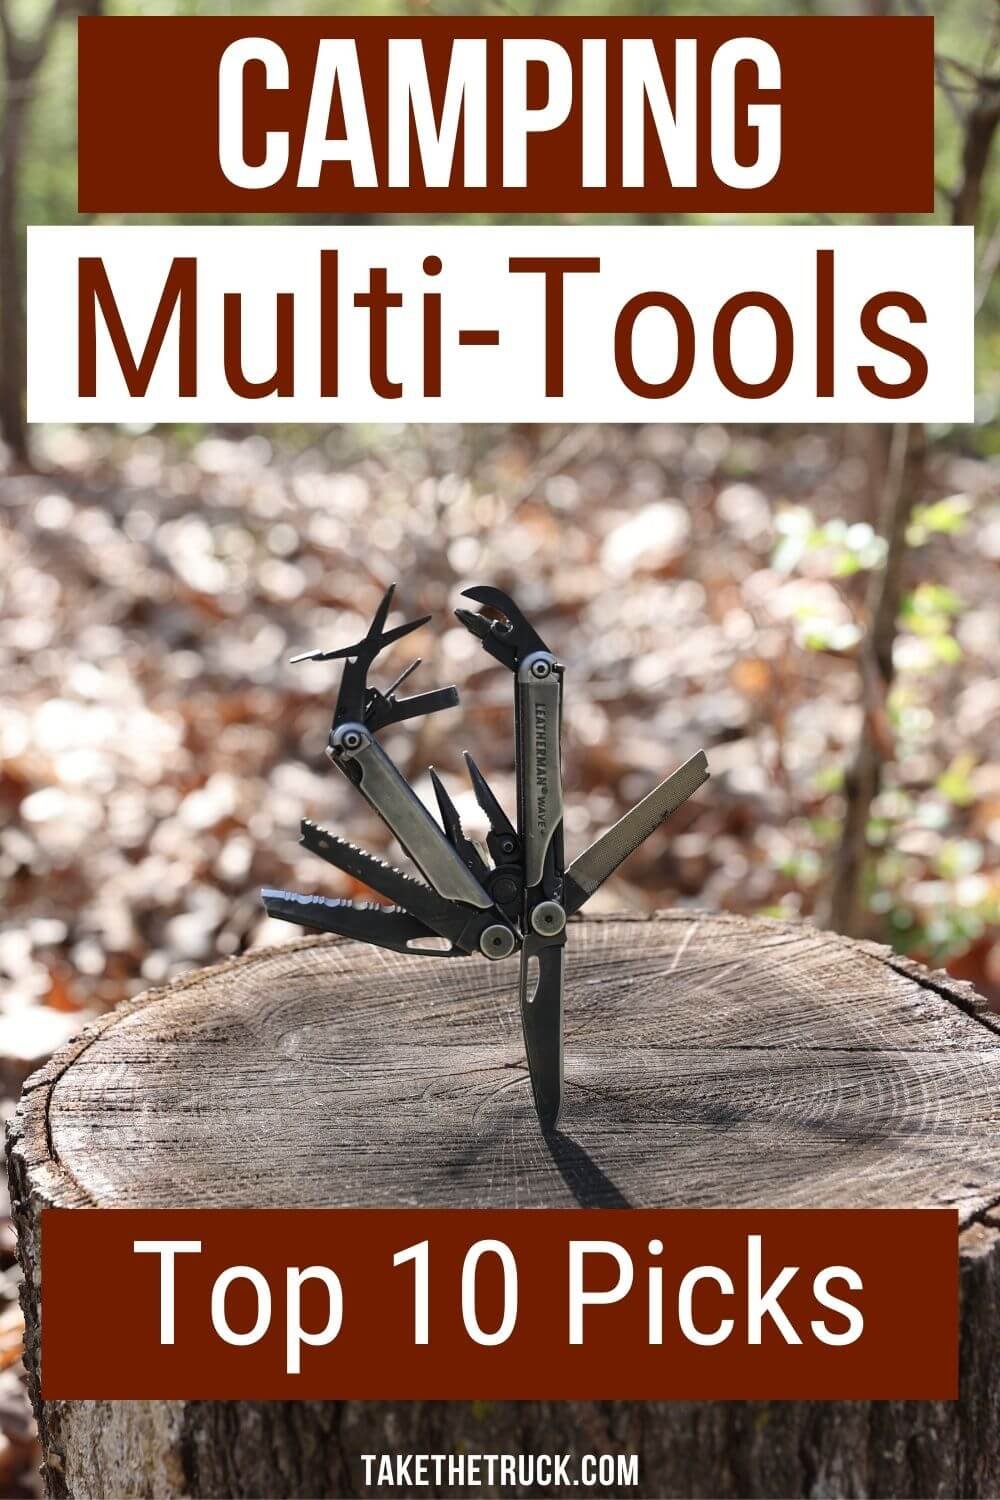 Ten top camping multi tool suggestions and multitools for everyday carry. Multi tool knife suggestions, leatherman multitool for everyday carry, and multitools for camping gear.